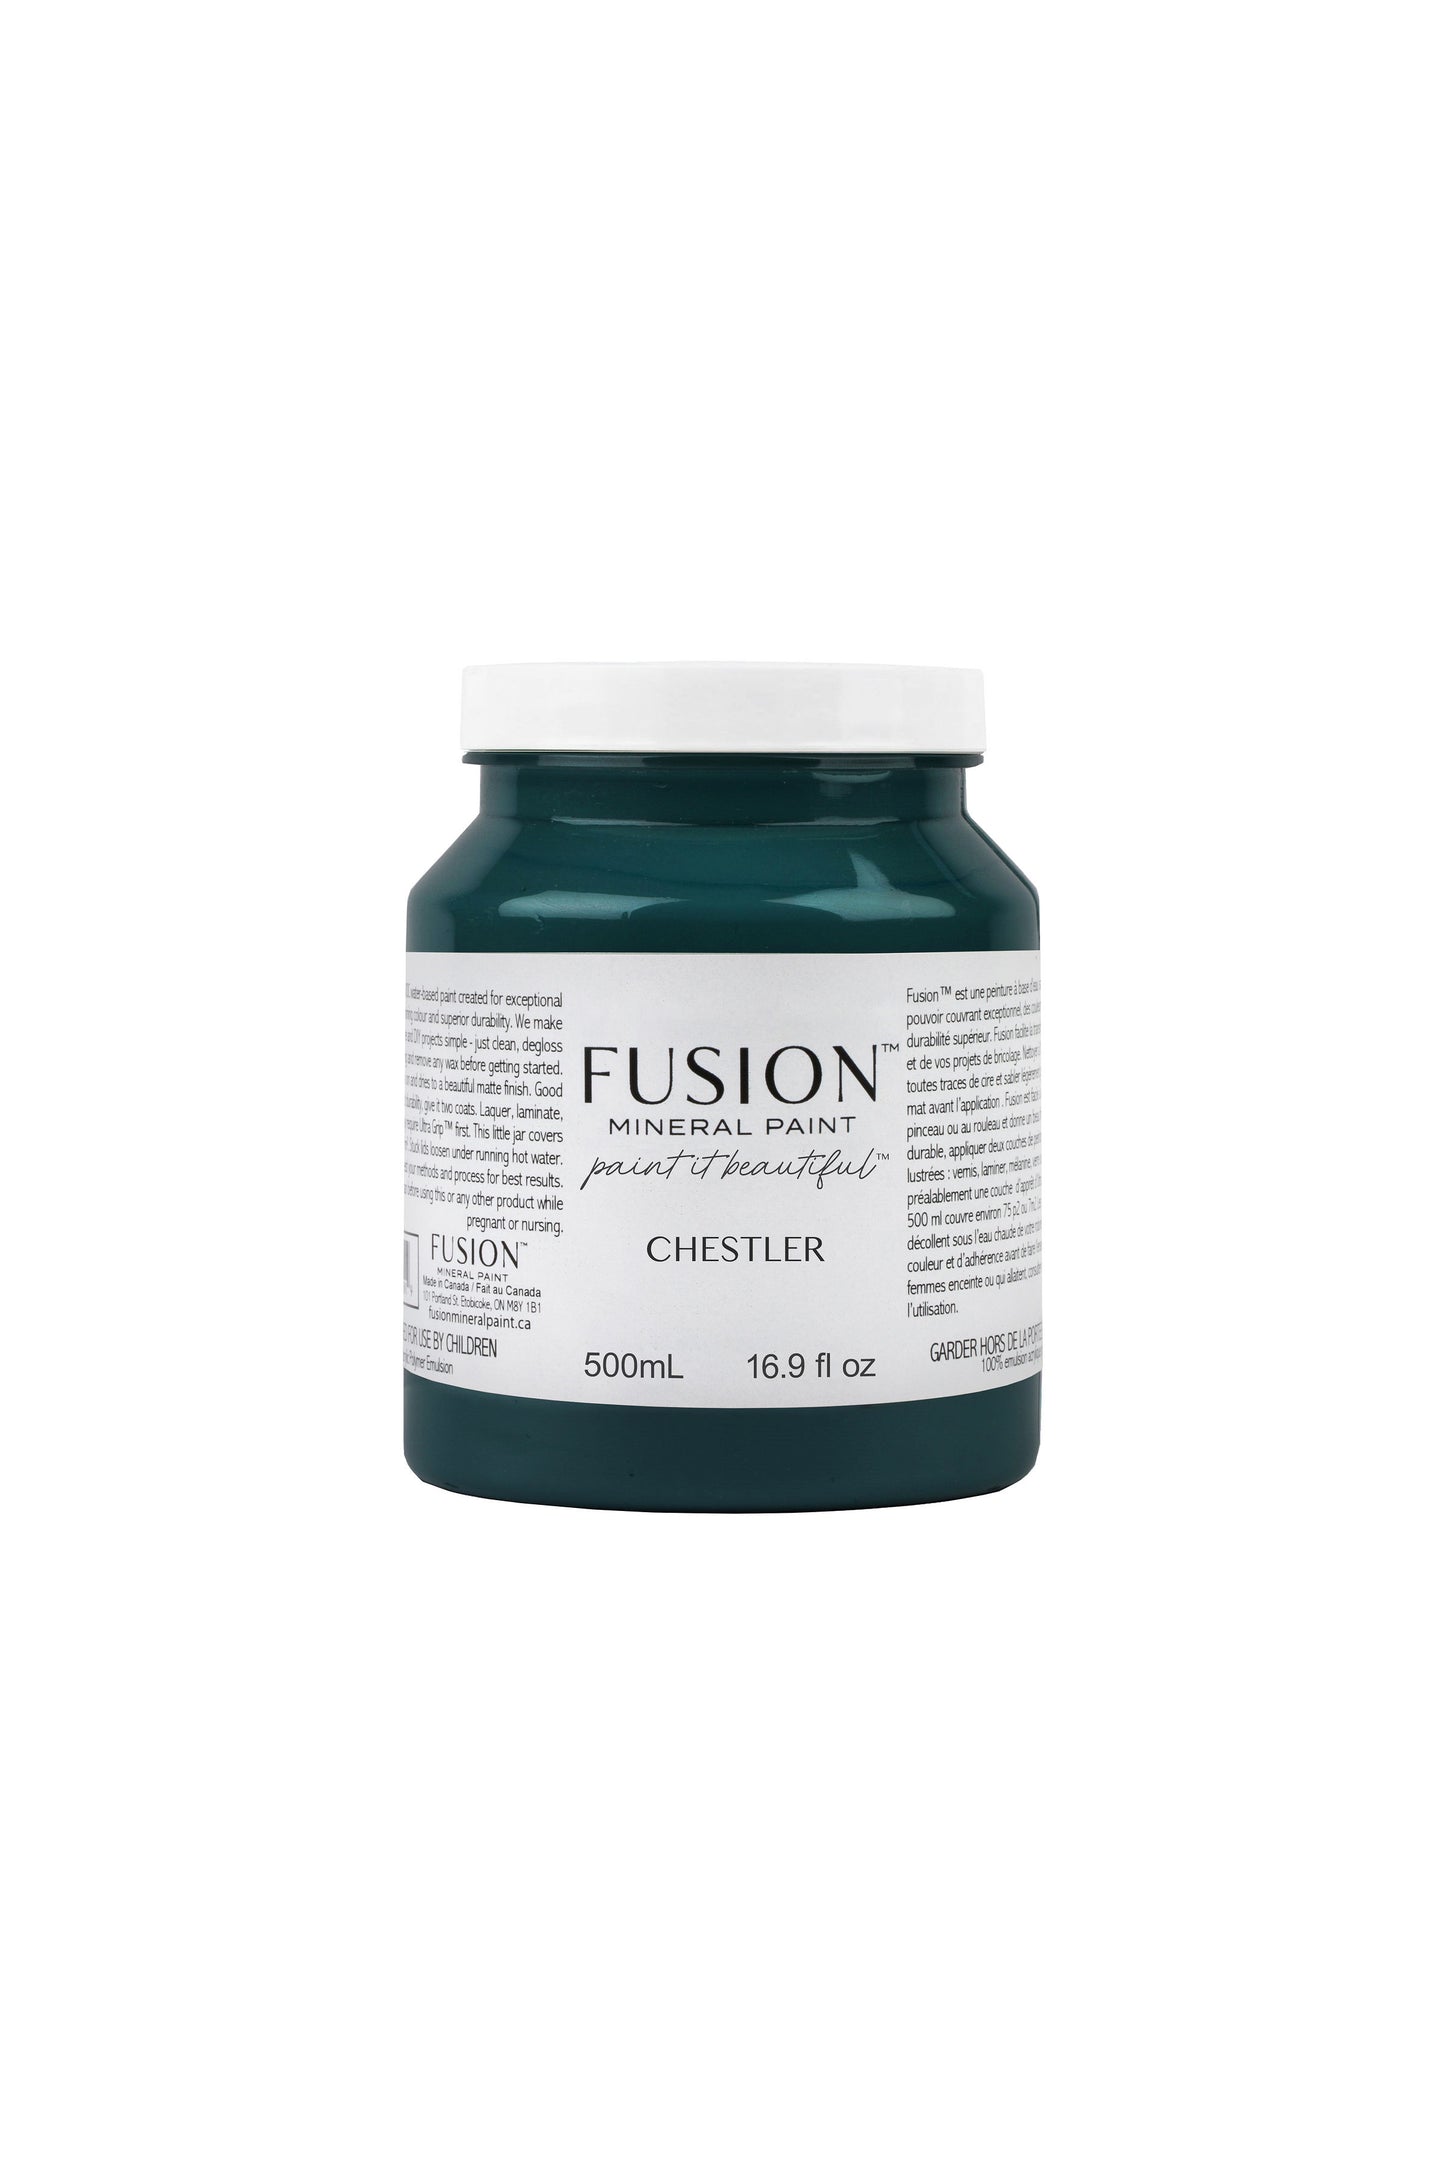 FUSION MINERAL PAINT- Chestler